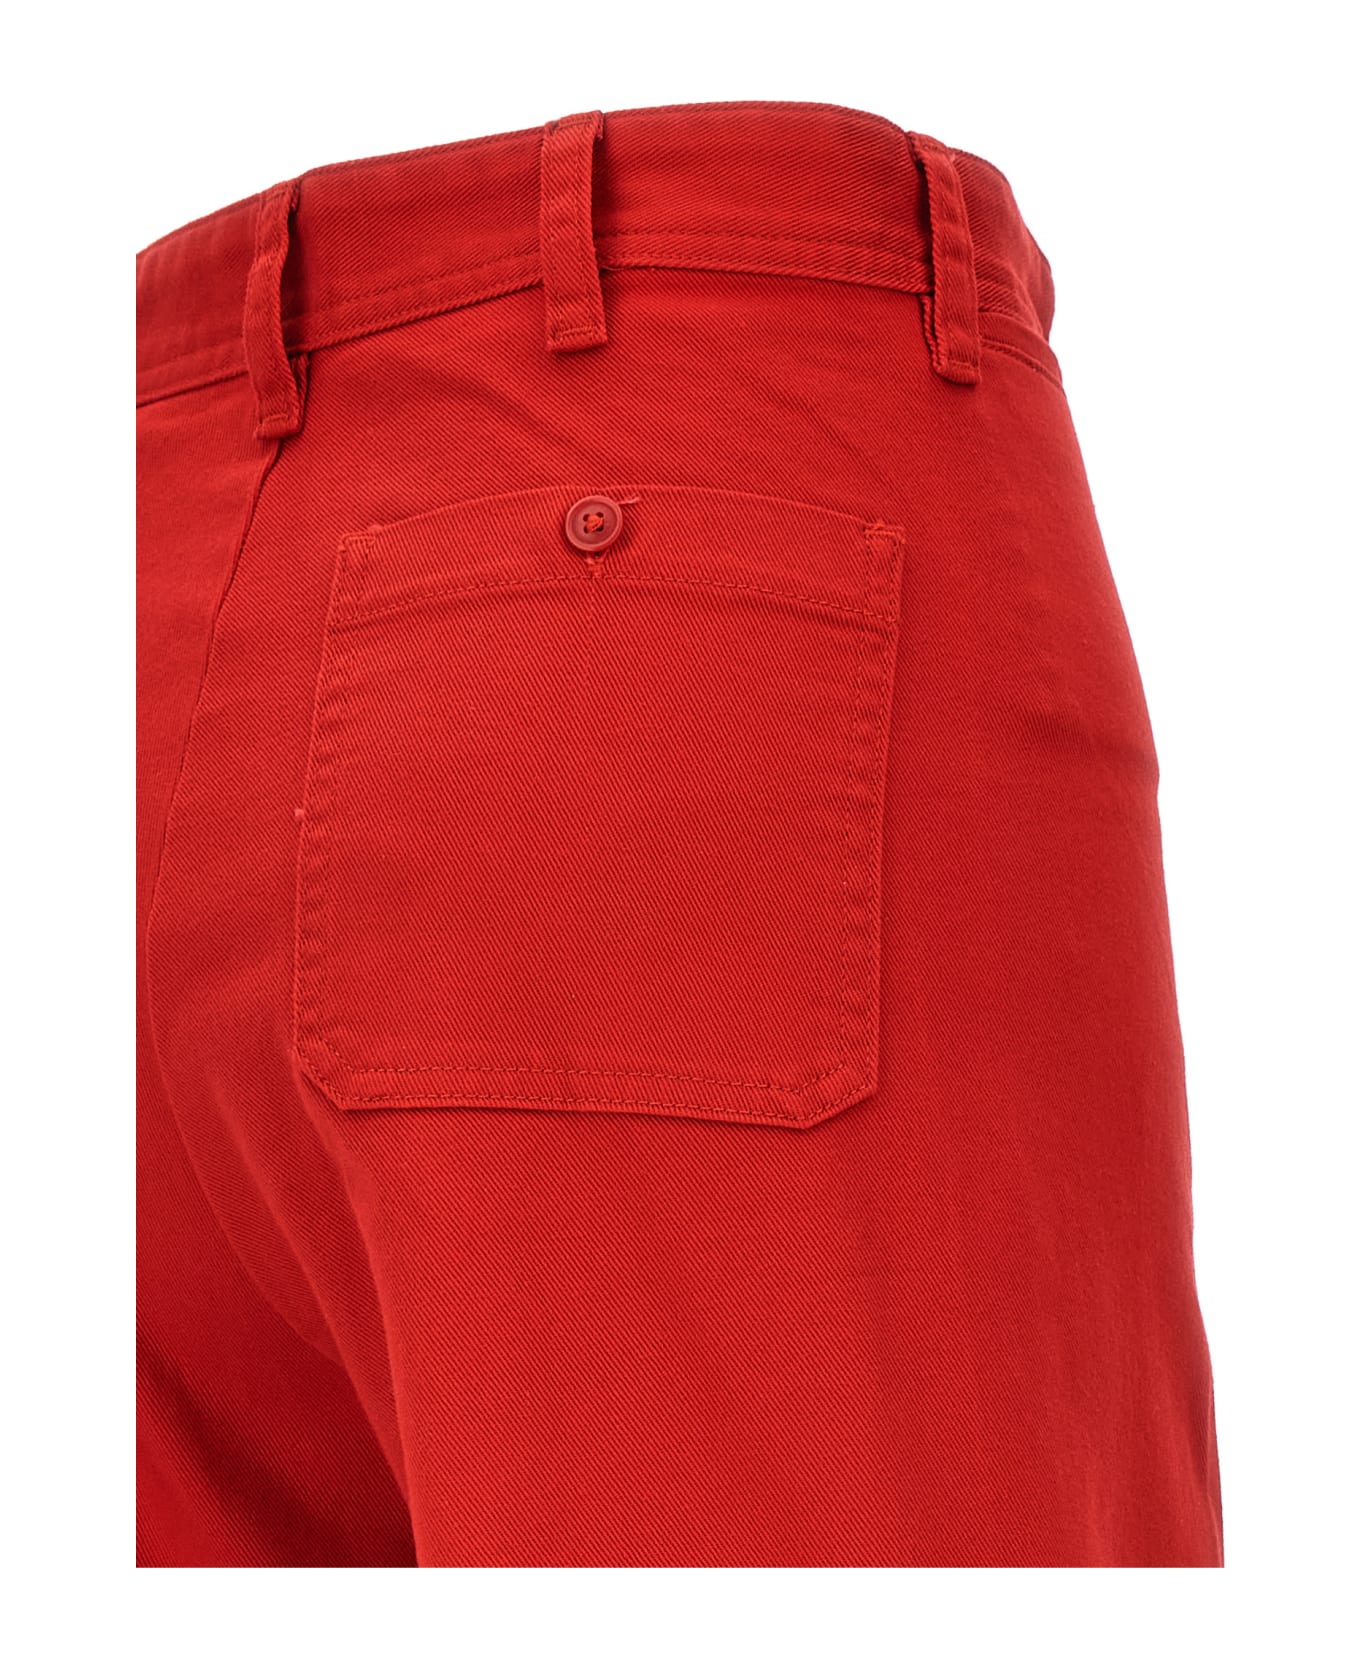 Polo Ralph Lauren Flared Pants - Red